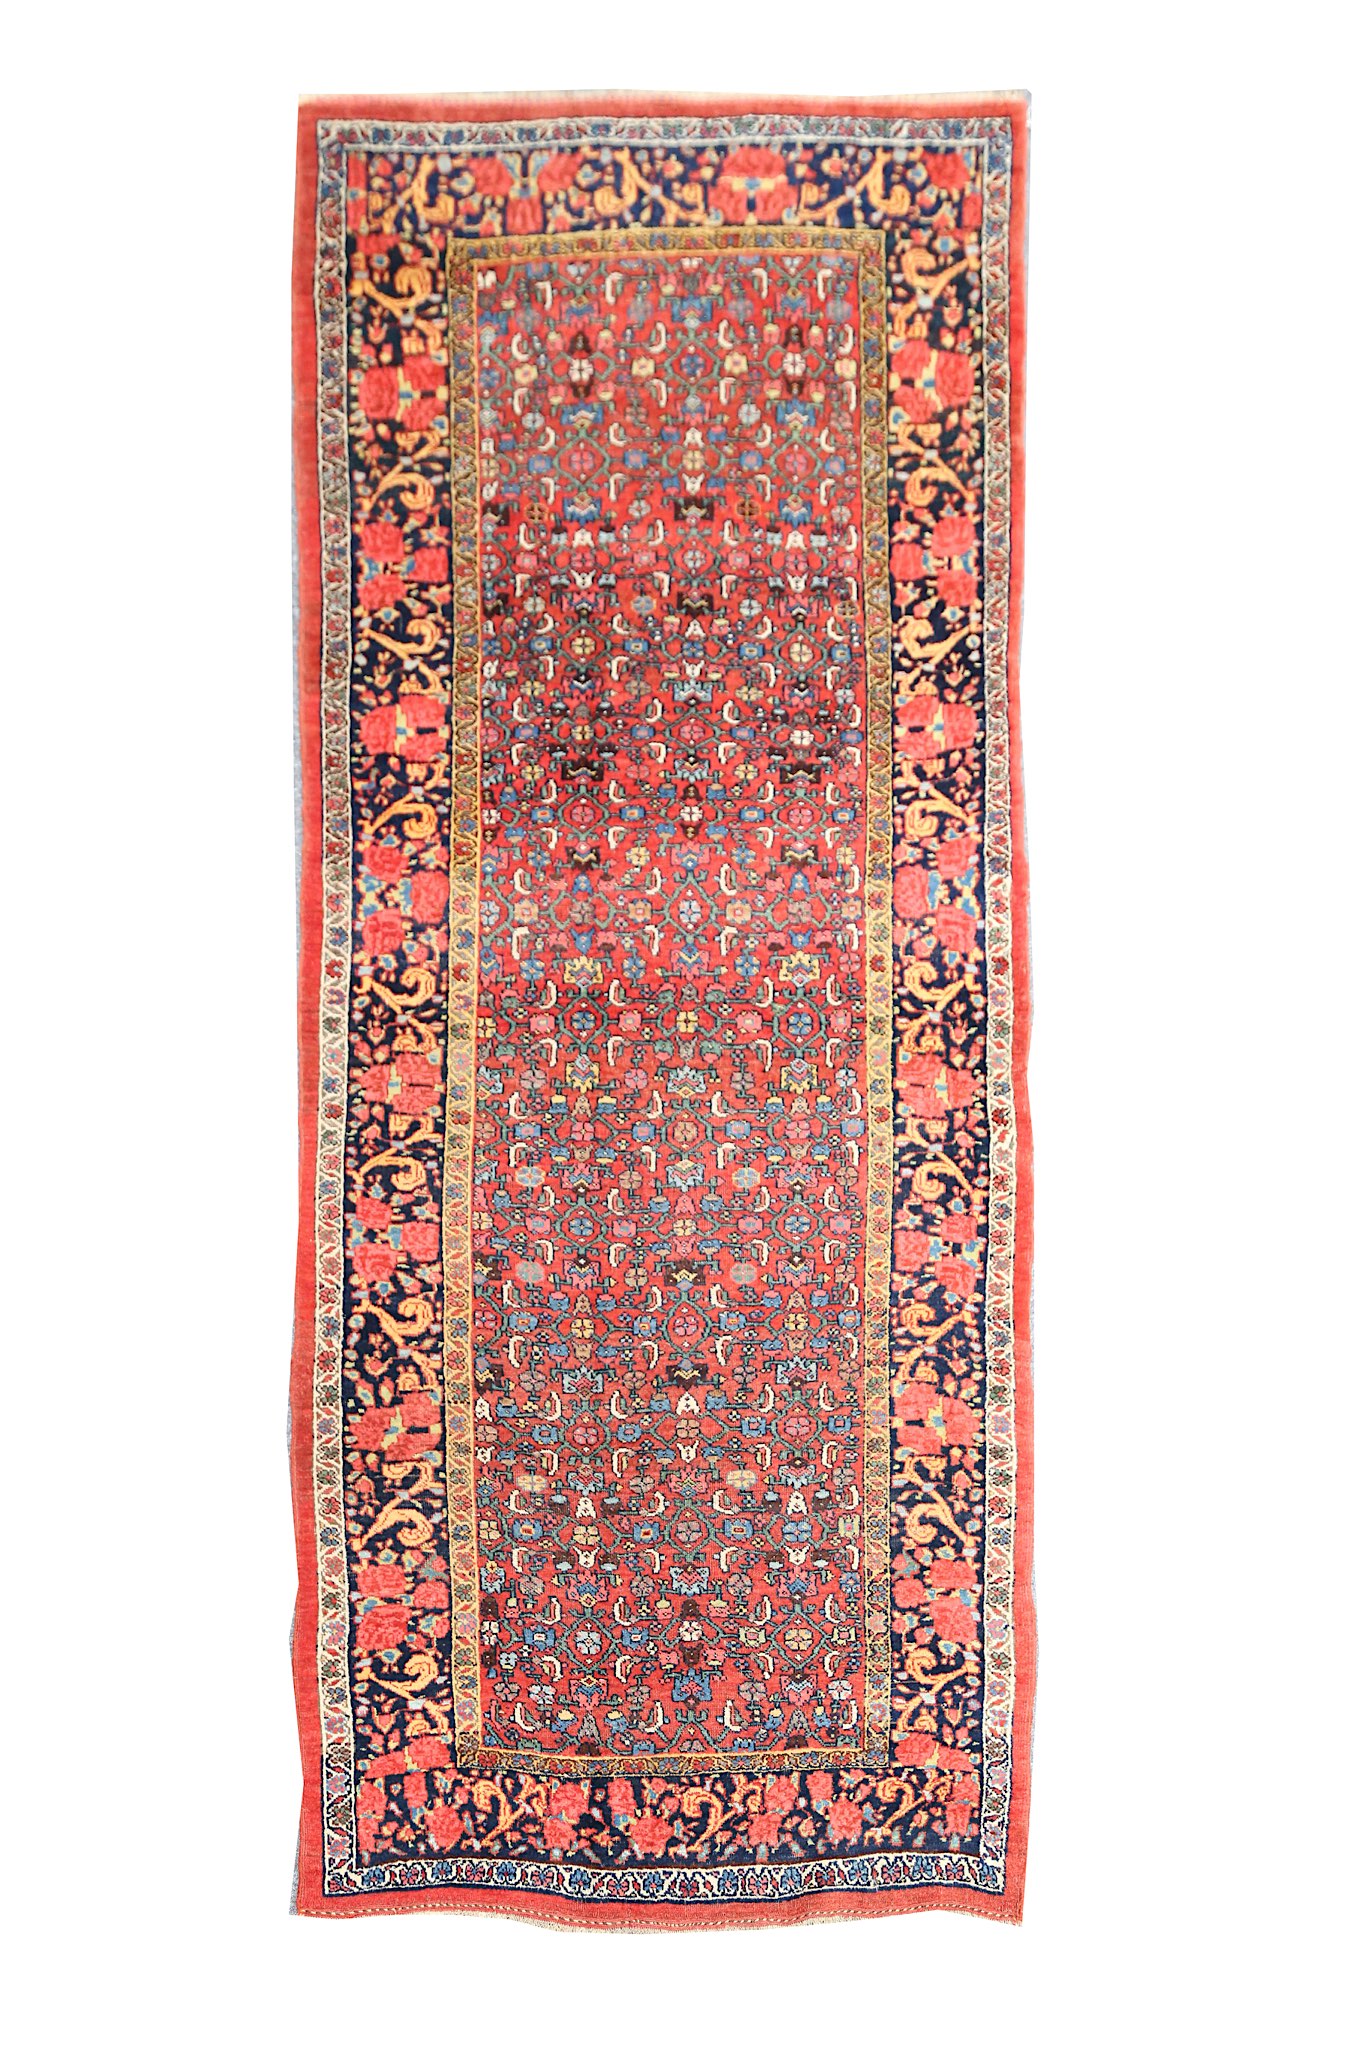 AN ANTIQUE BIJAR RUNNER, NORTH-WEST PERSIA approx: 9ft.11in. x 4ft.2in.(302cm. x 127cm.) The rust-